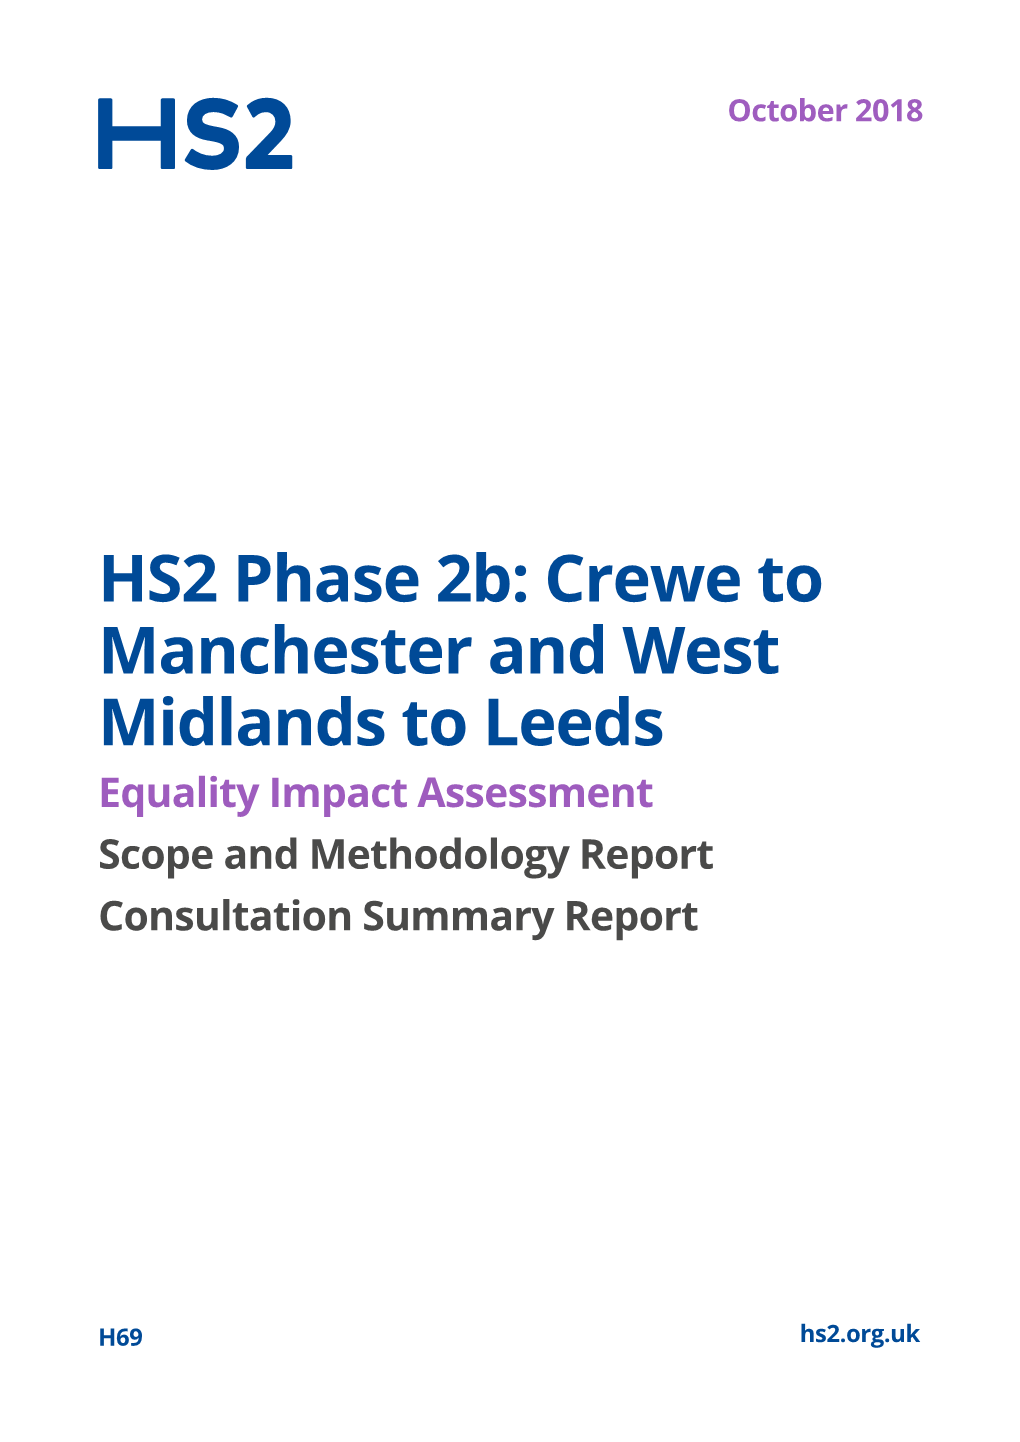 HS2 Phase 2B: Crewe to Manchester and West Midlands to Leeds Equality Impact Assessment Scope and Methodology Report Consultation Summary Report